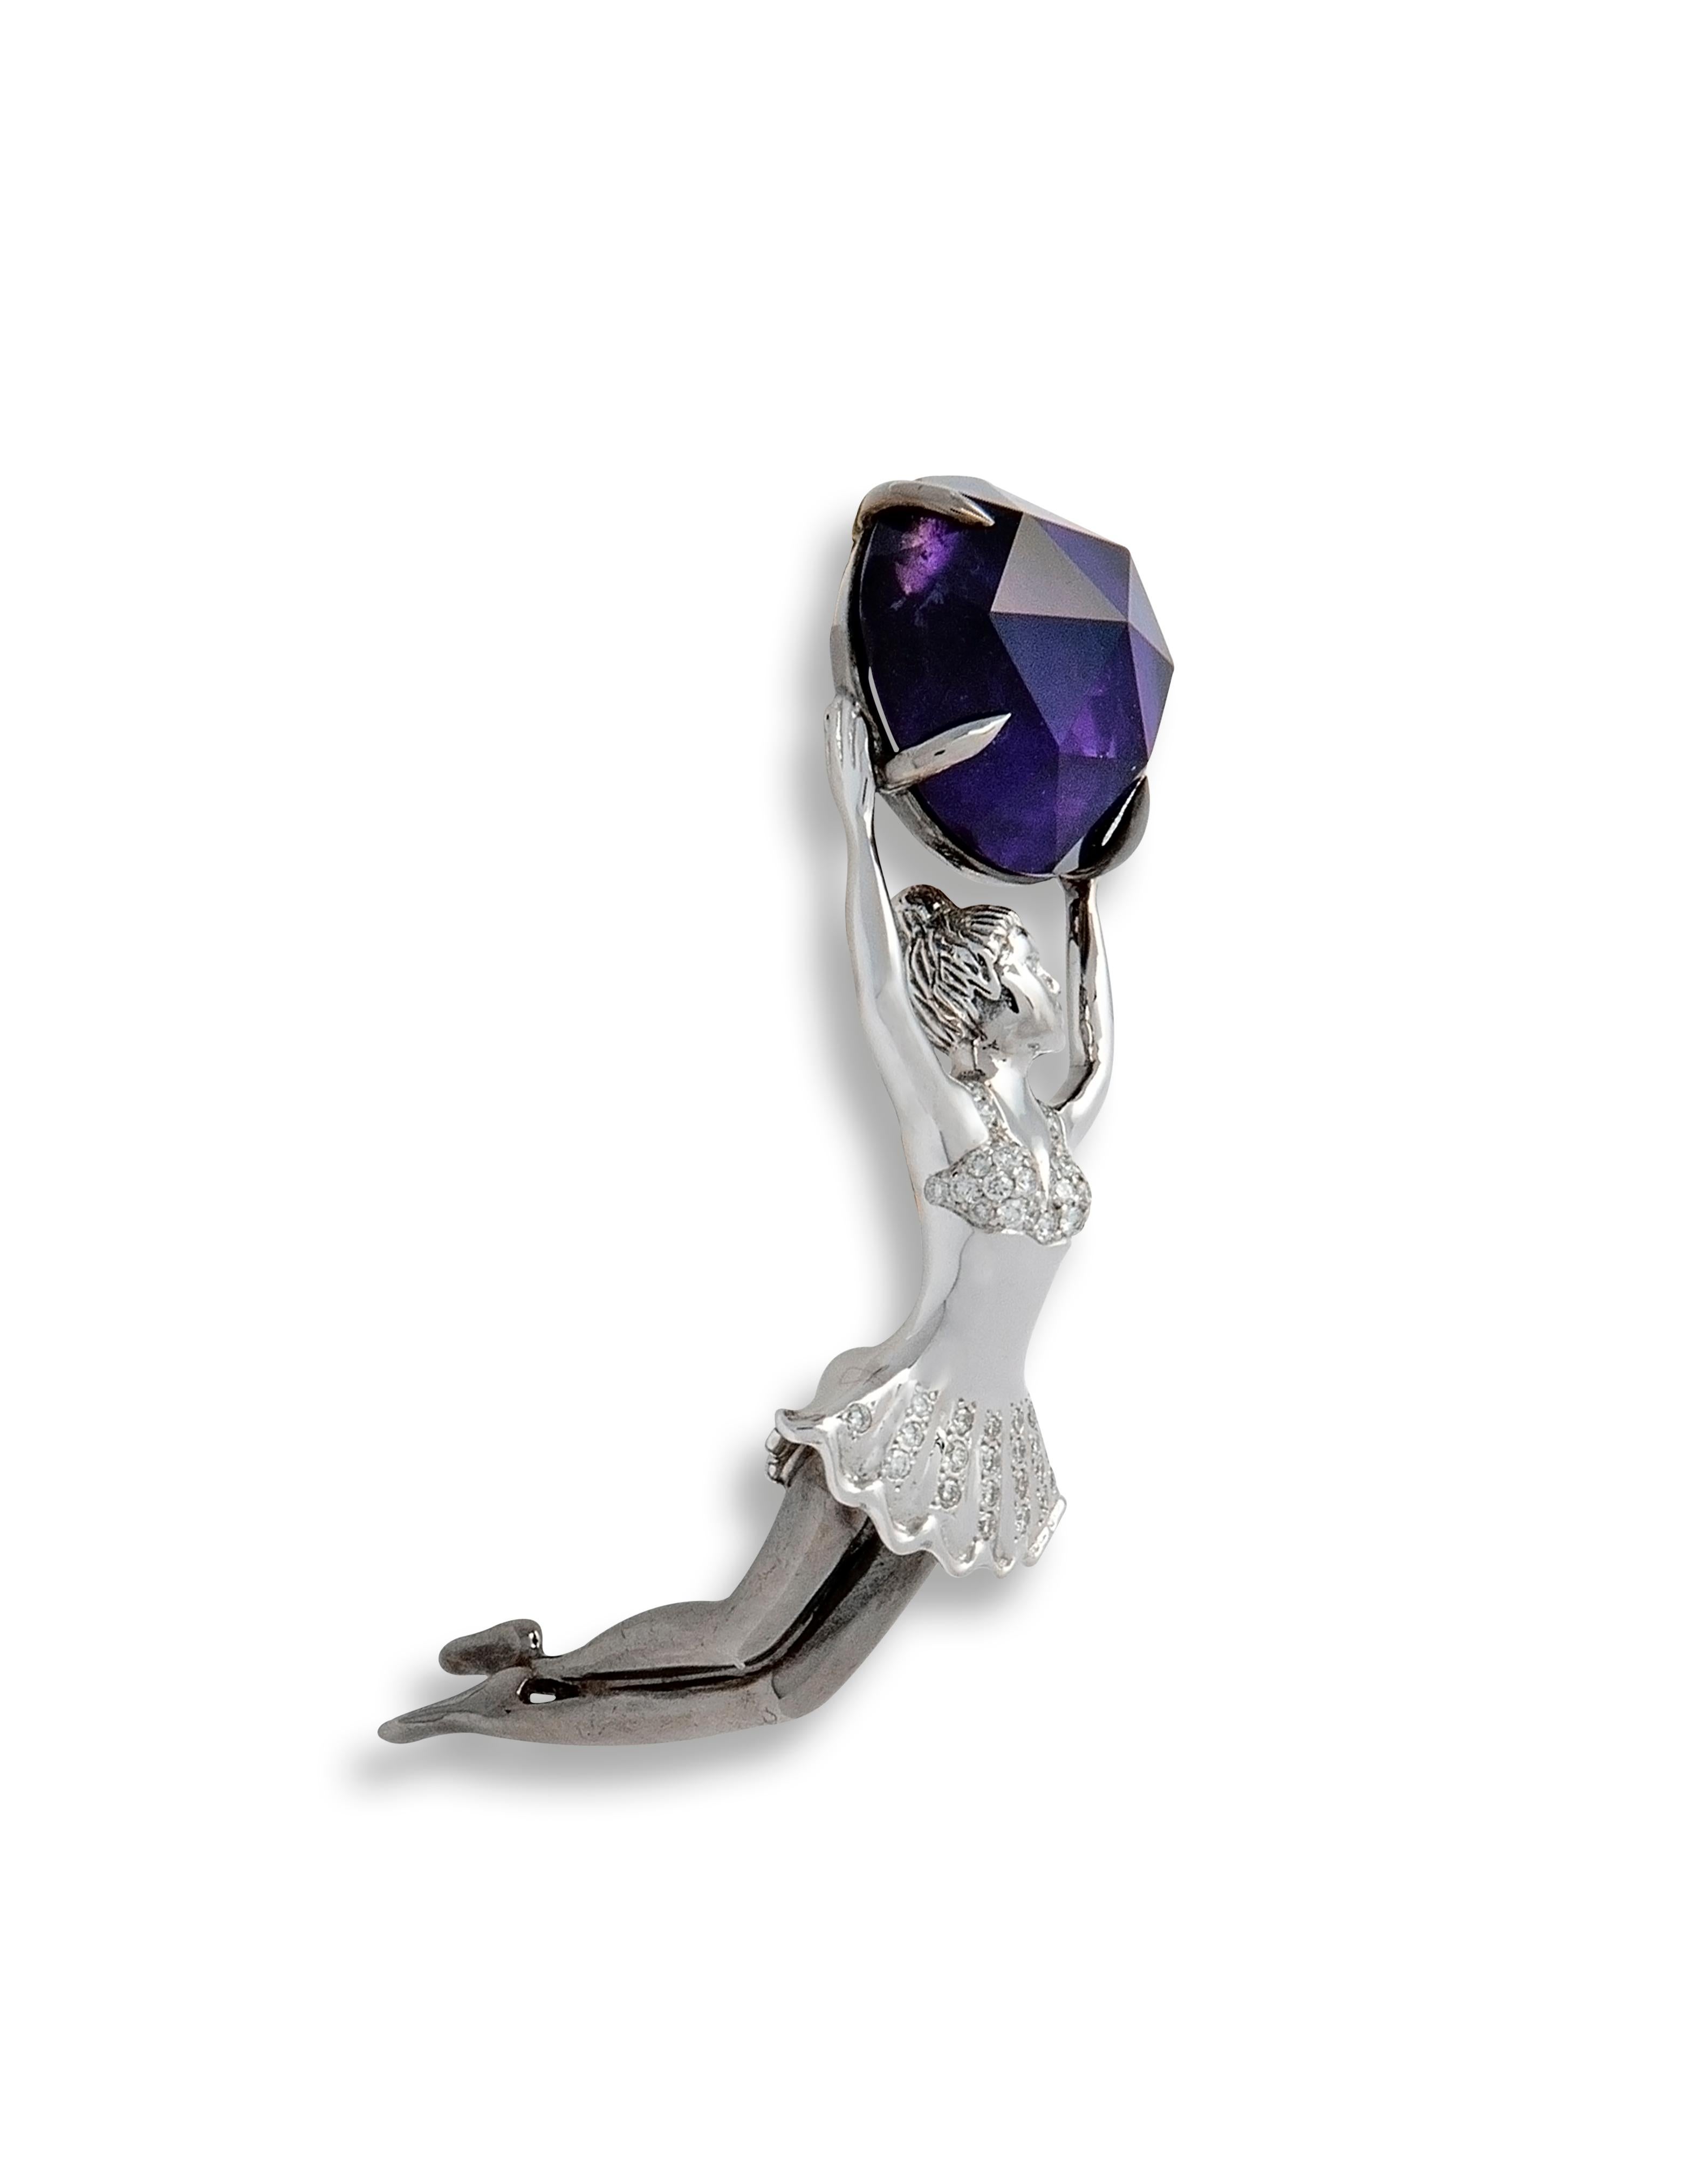 Paving: White Diamonds 0,24ct.; Amethysts 9,25ct.
Material: White Gold 750; Yellow Gold 750; Silver 925; Black Rhodium

Matching Ring available. For further information please contact us. 

AENEA's MAGGIE & RUDI Collection

Exceptional Earrings with